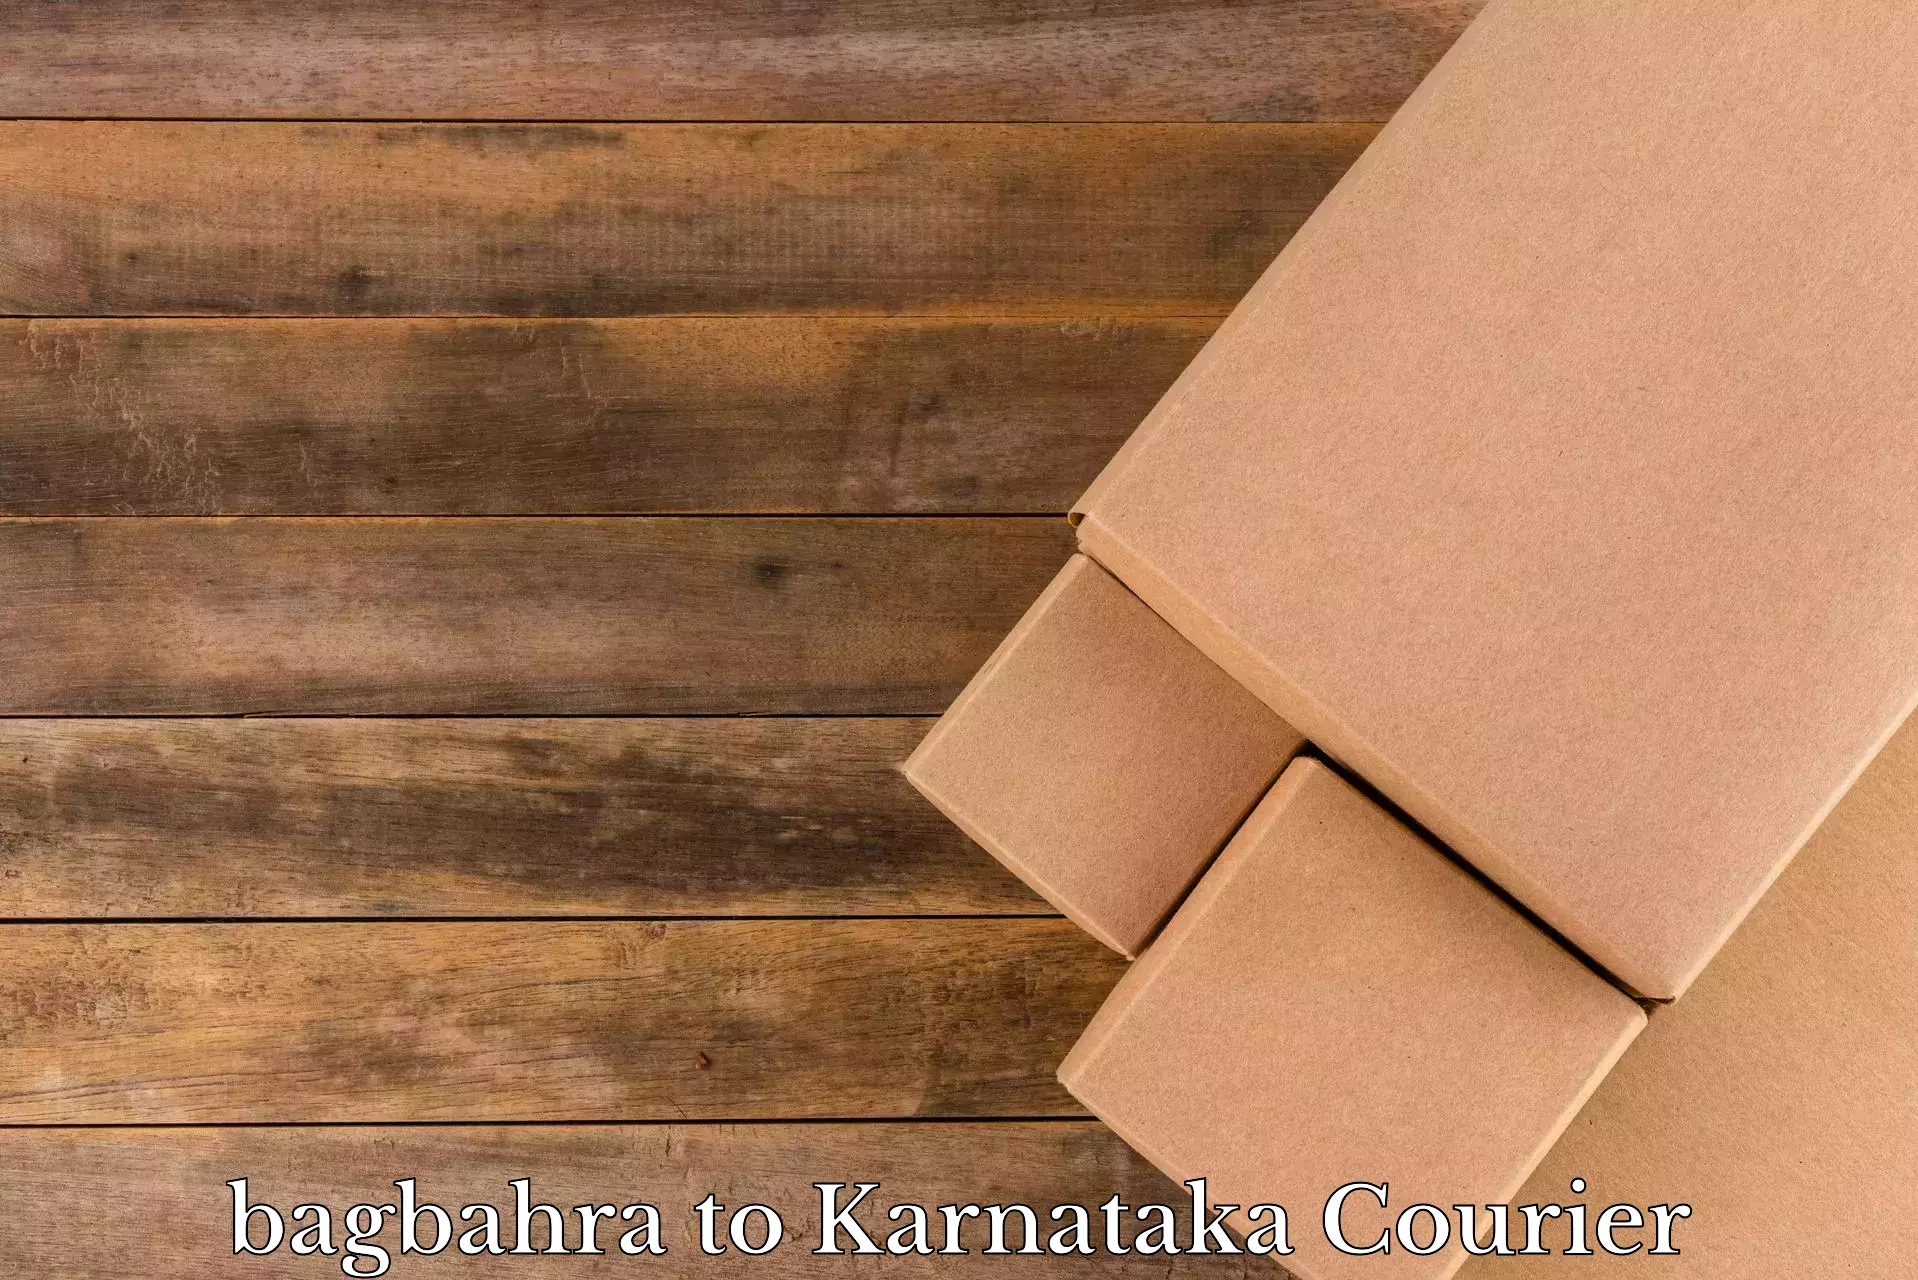 Home relocation experts bagbahra to Yenepoya Mangalore